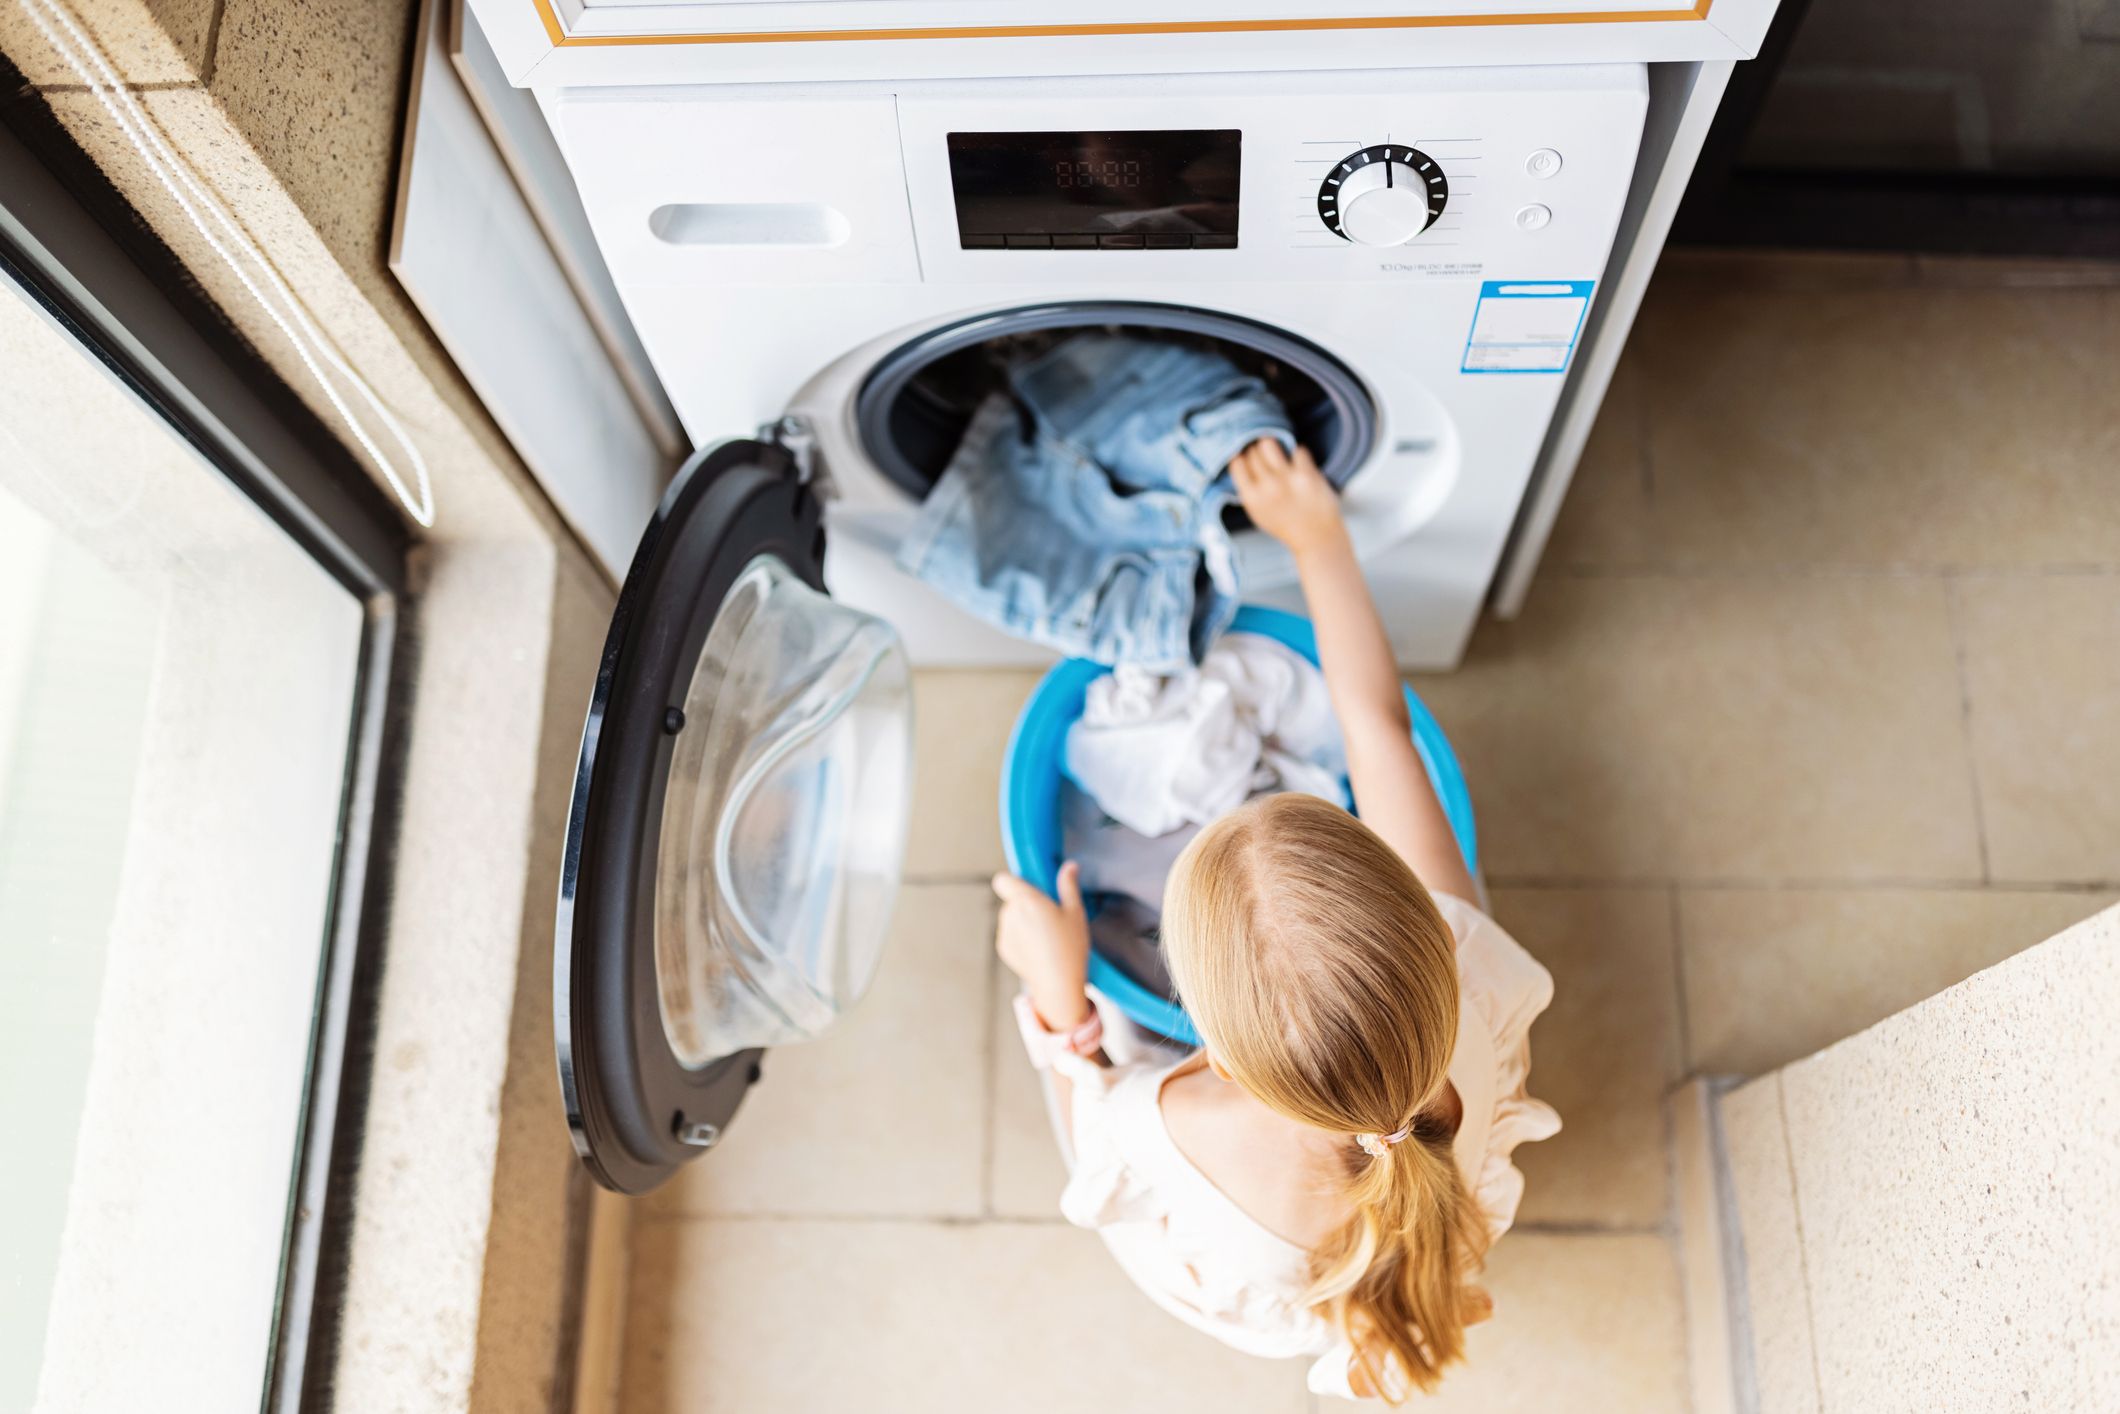 Tips on Maximize Drying With Your Dishwasher